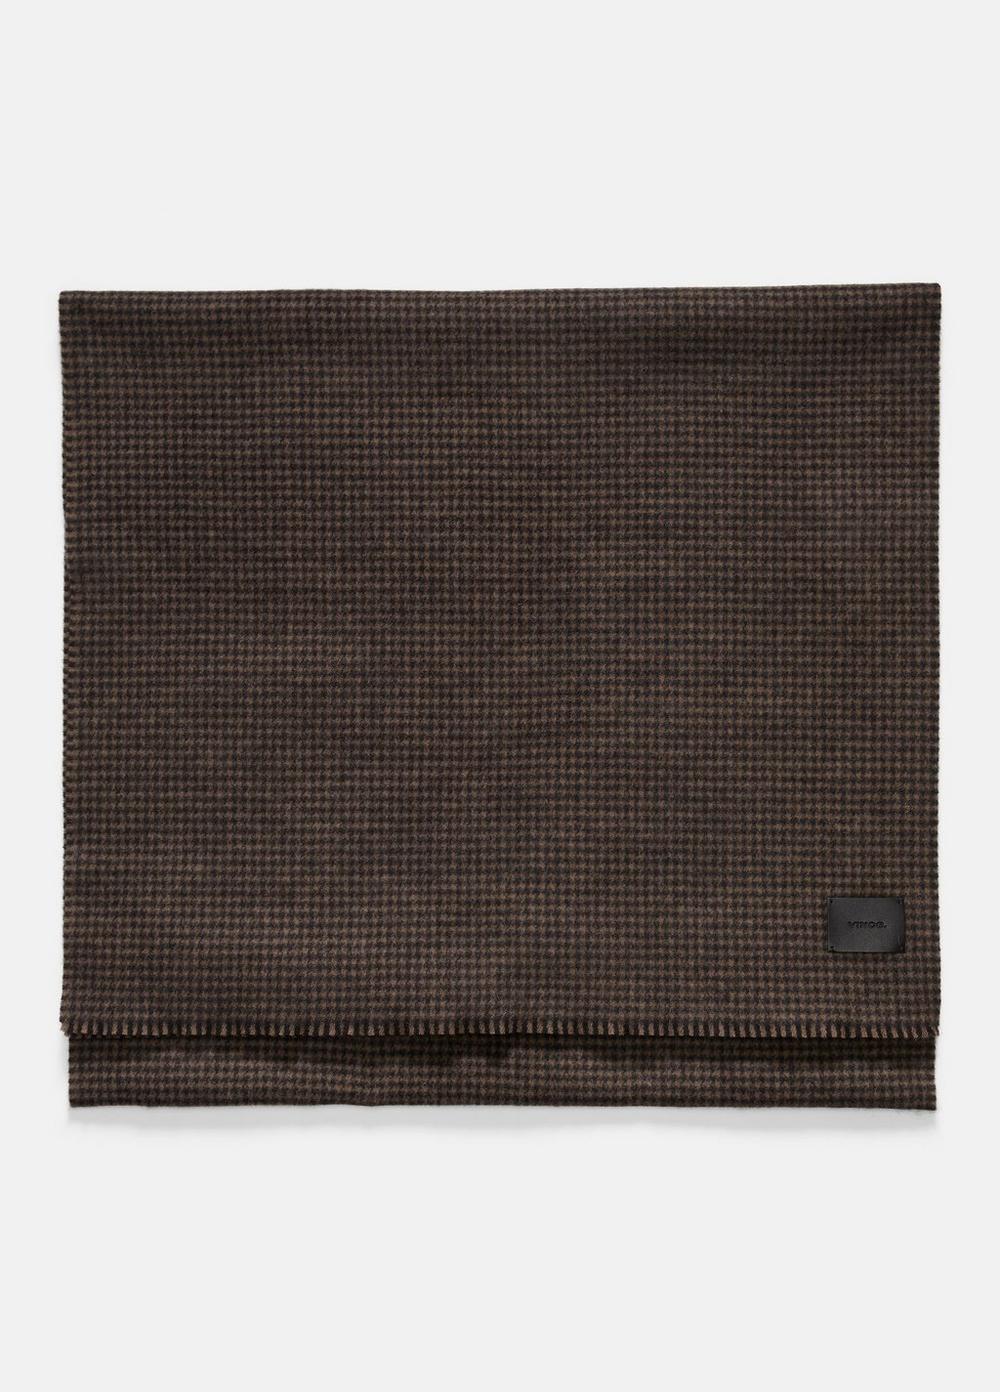 Houndstooth Wool And Cashmere Double-Face Scarf, Black/camel Vince